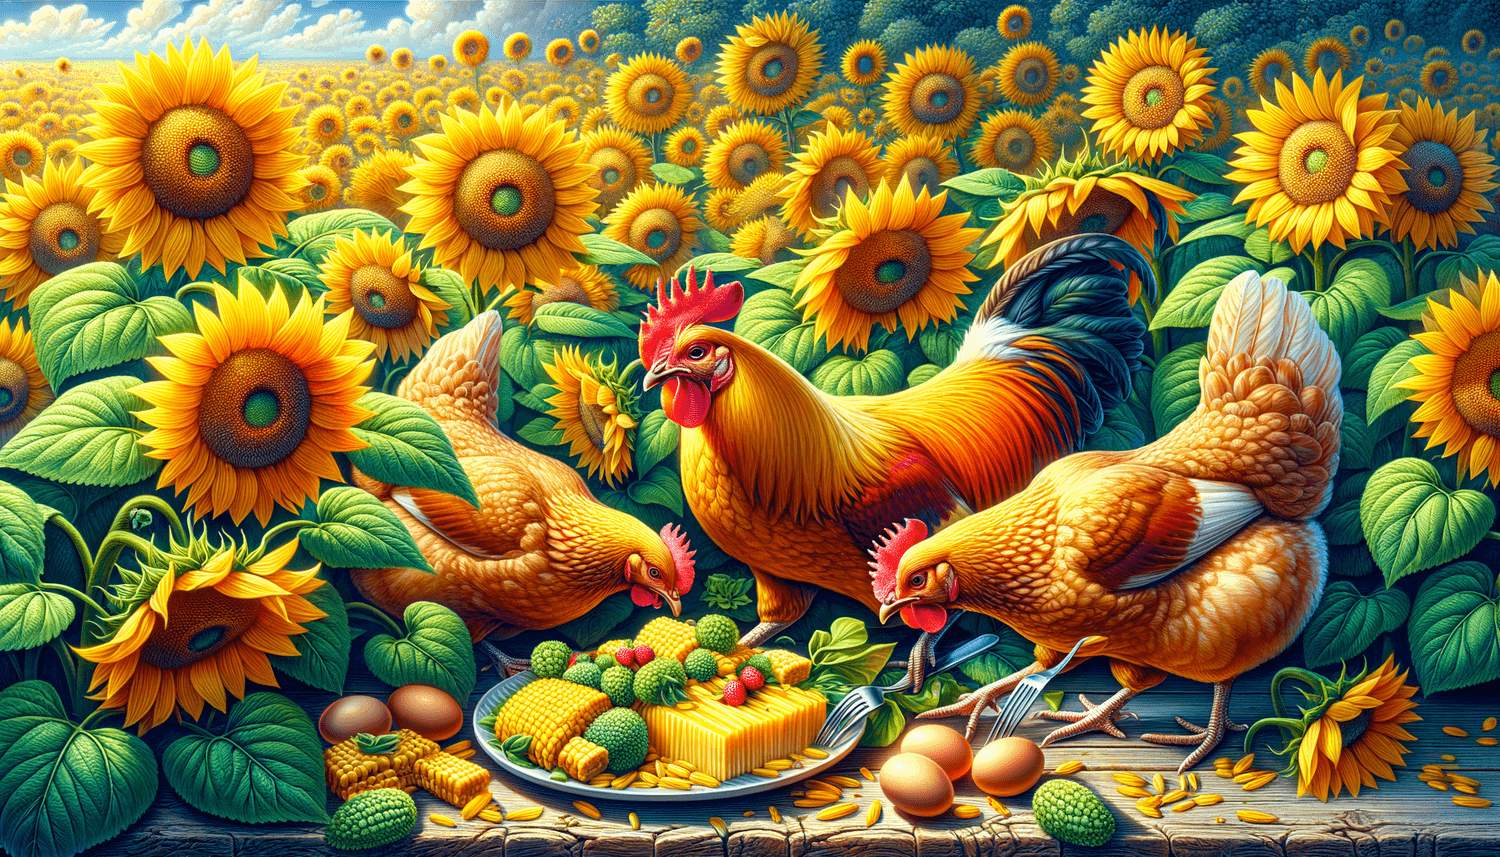 Can Chickens Eat Sunflower Plants?